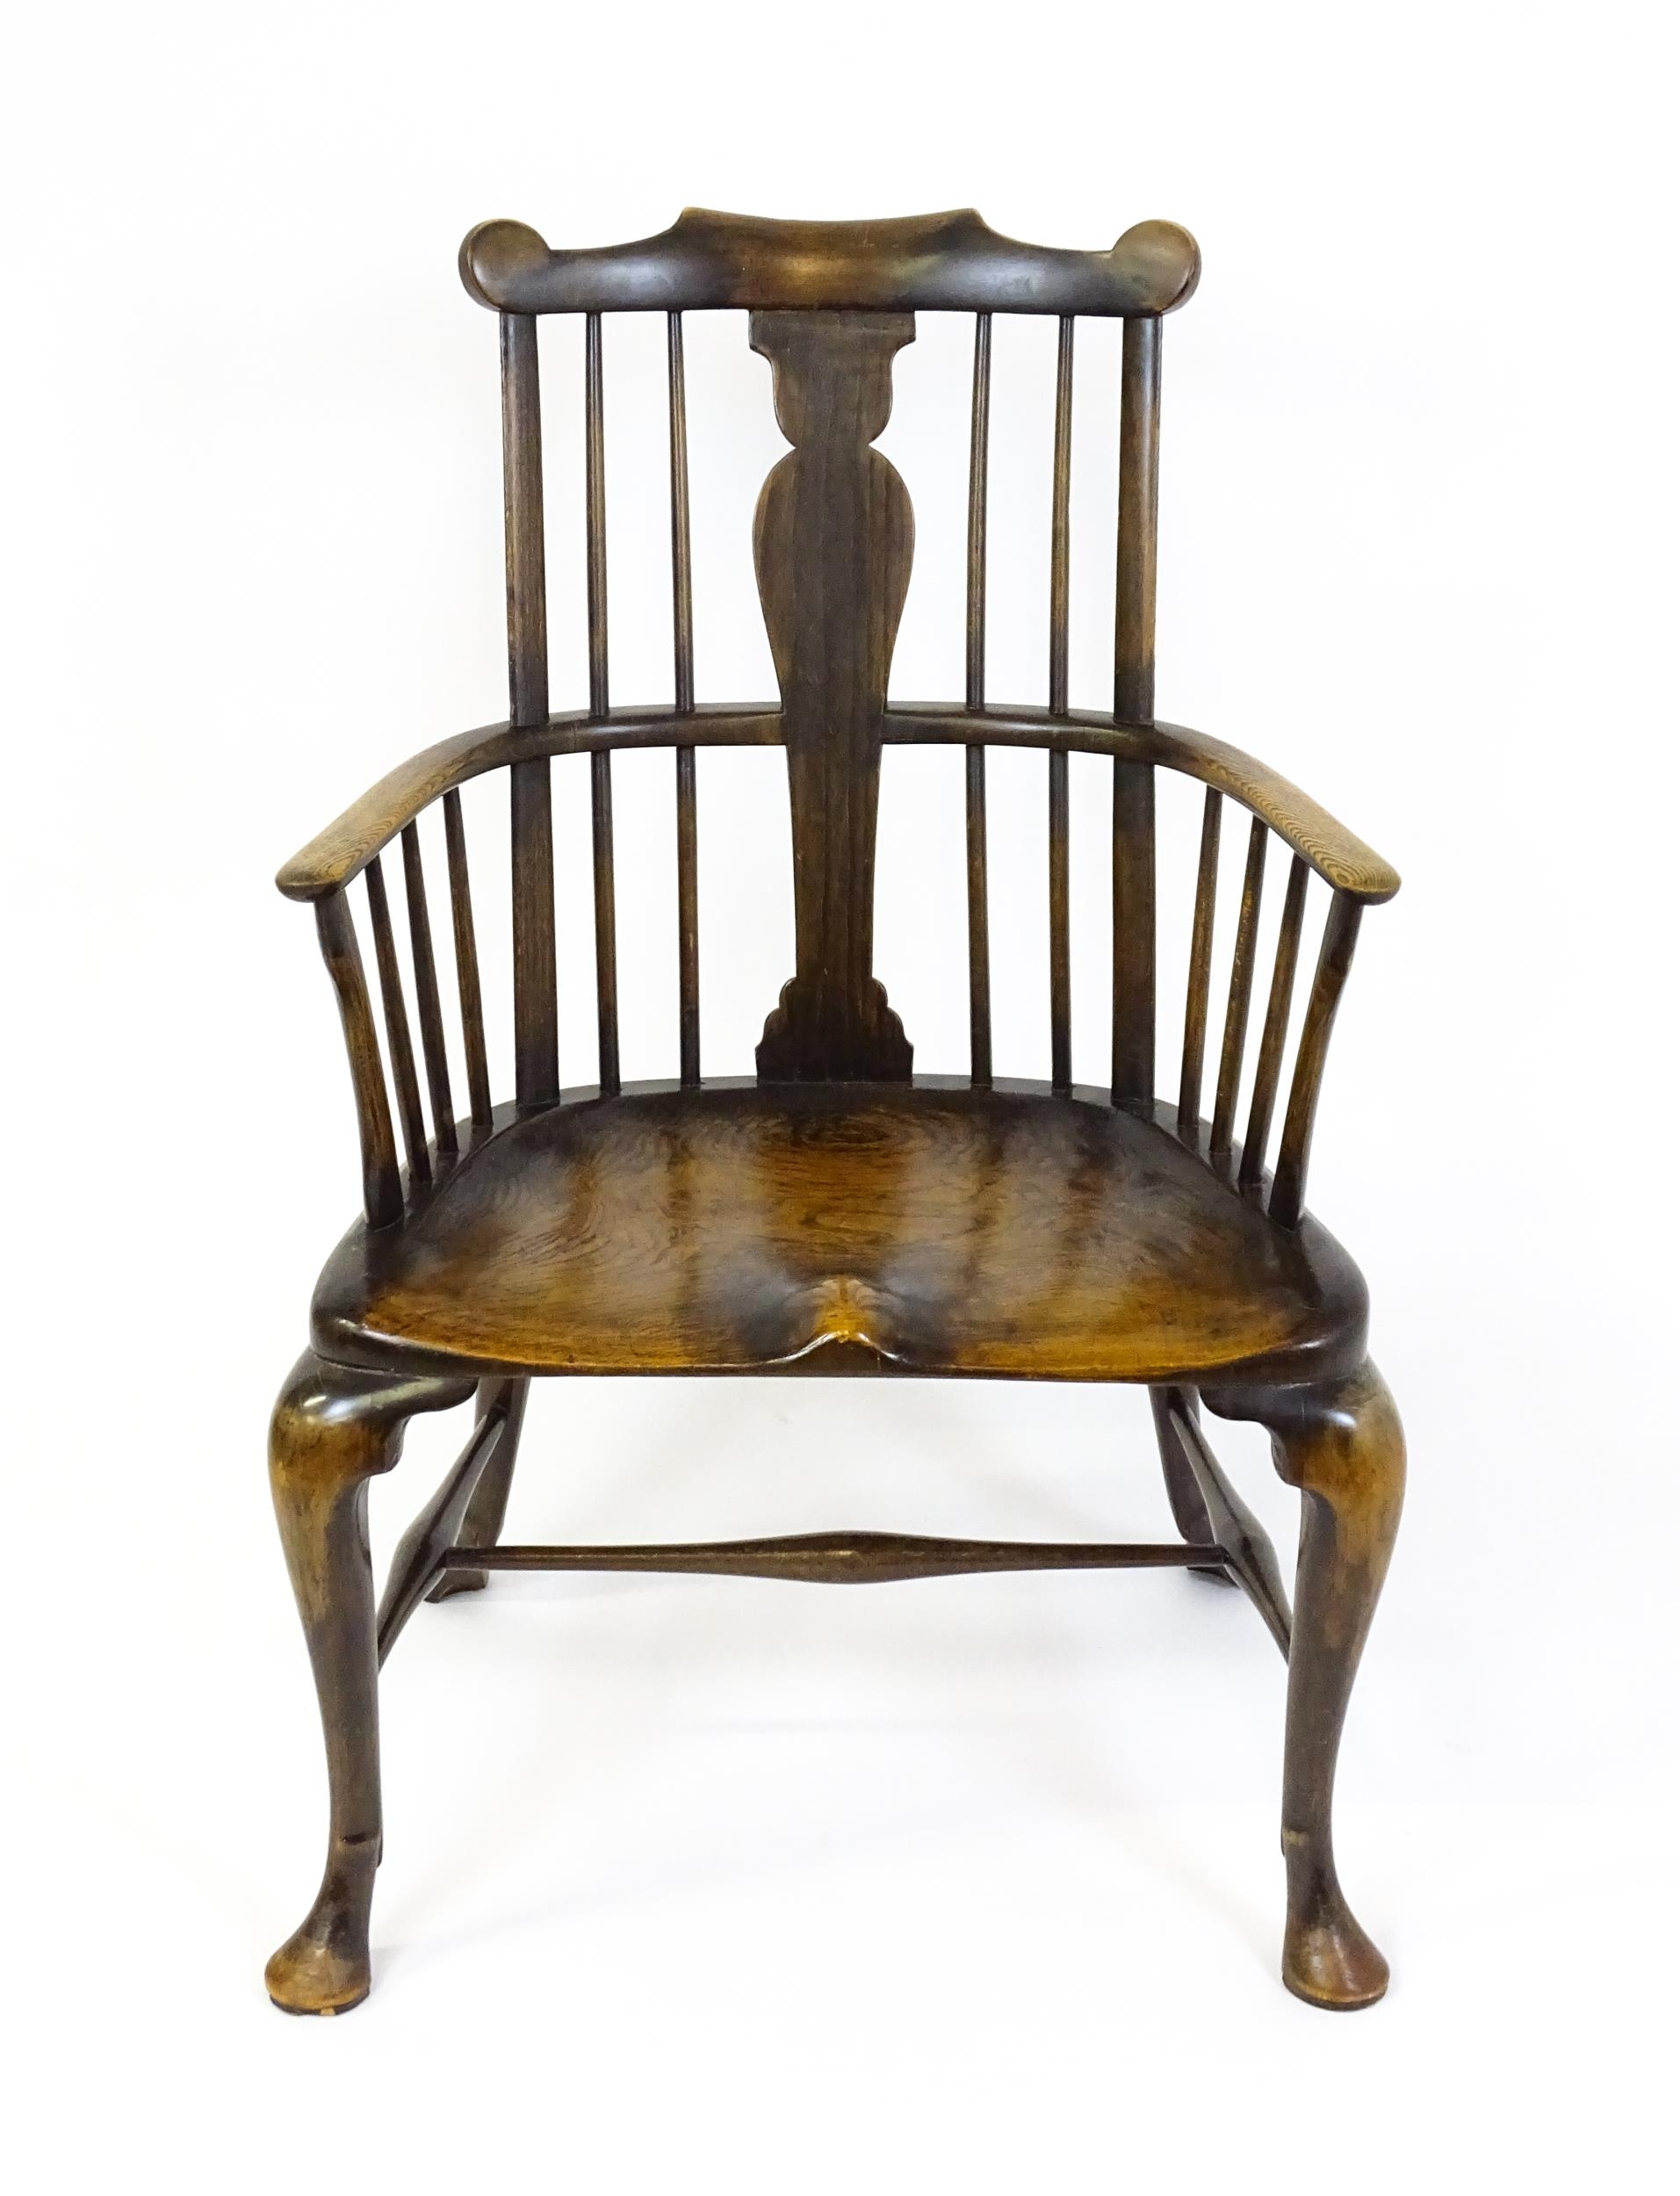 A late 19thC / early 20thC comb back Windsor chair with a vase shaped back splat and an unusually - Image 3 of 6